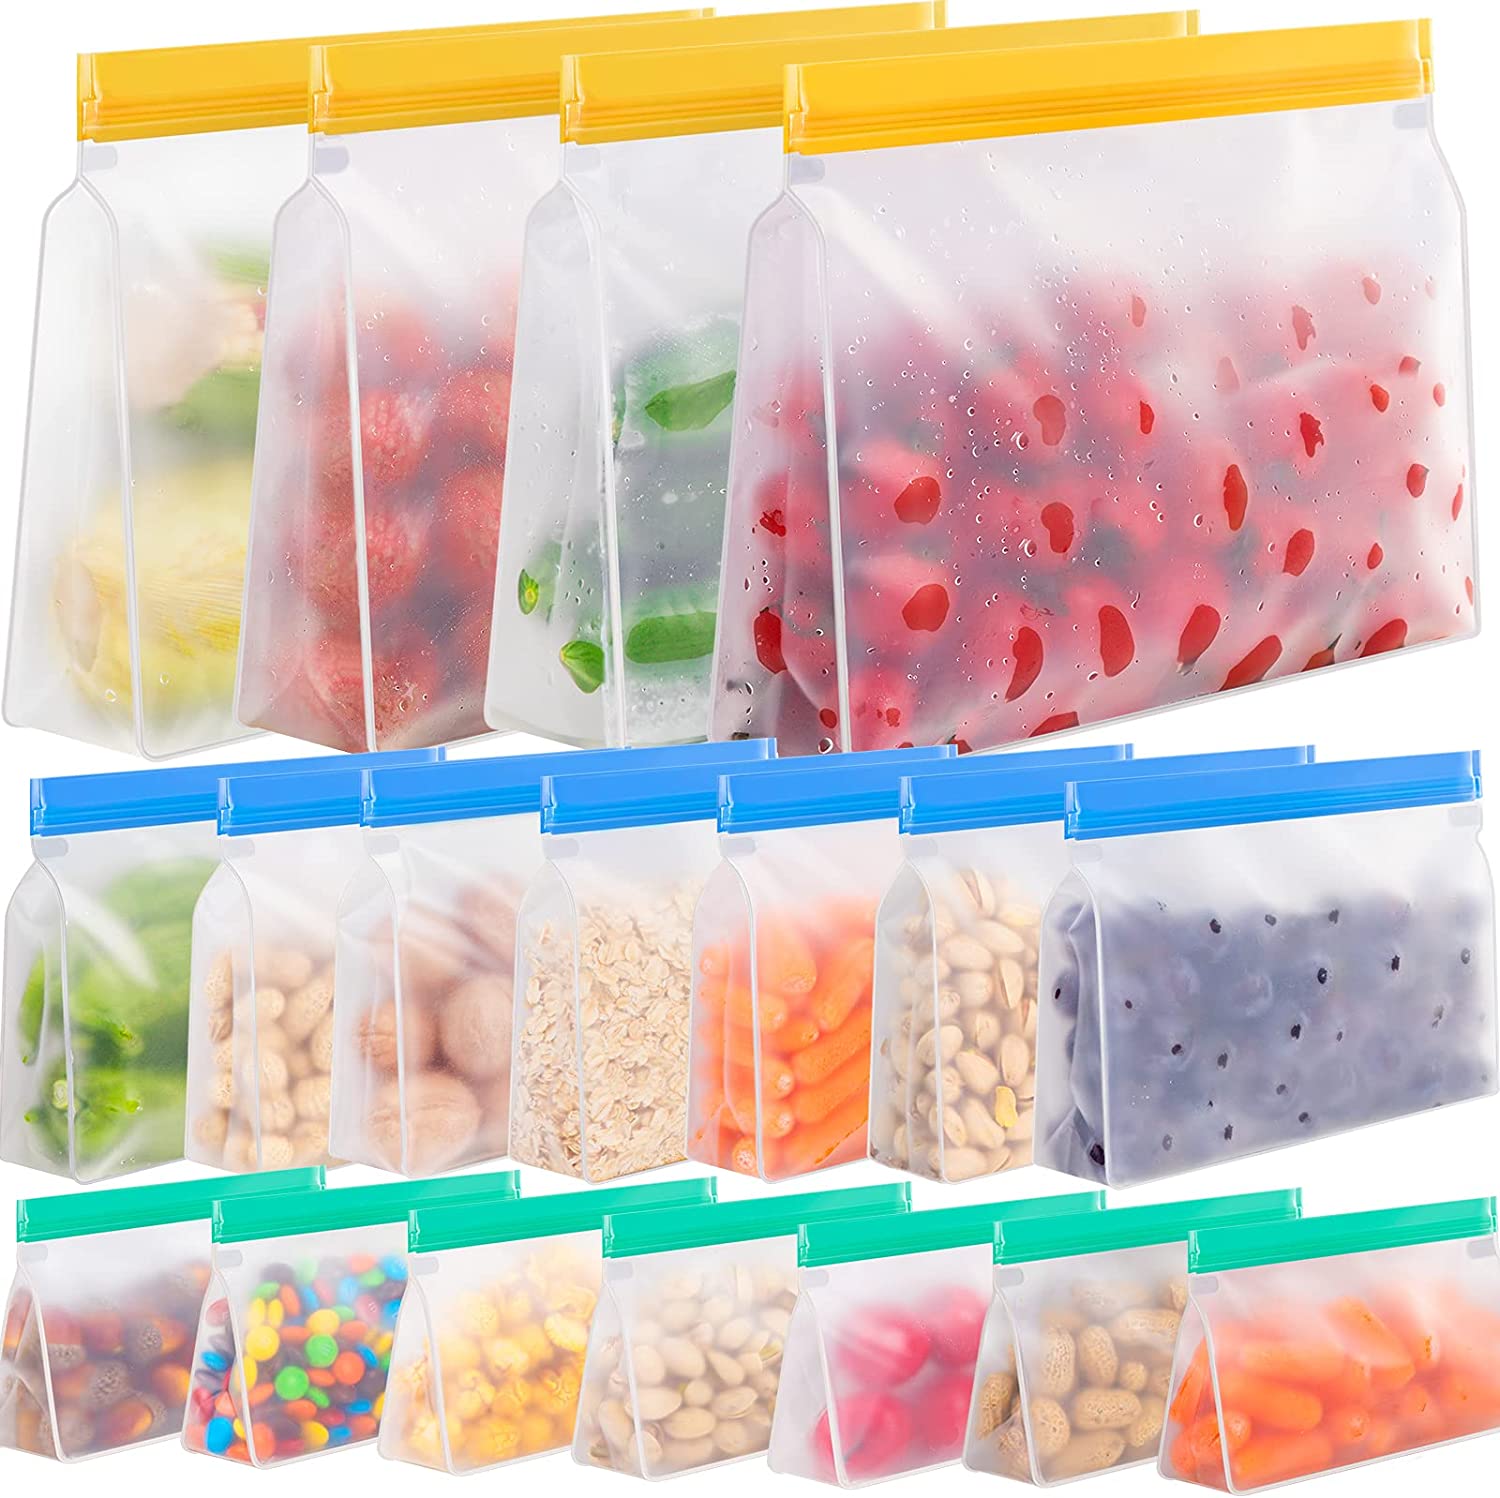 Reusable Storage Bags Stand Up -  - Reusable Freezer Lunch Bags